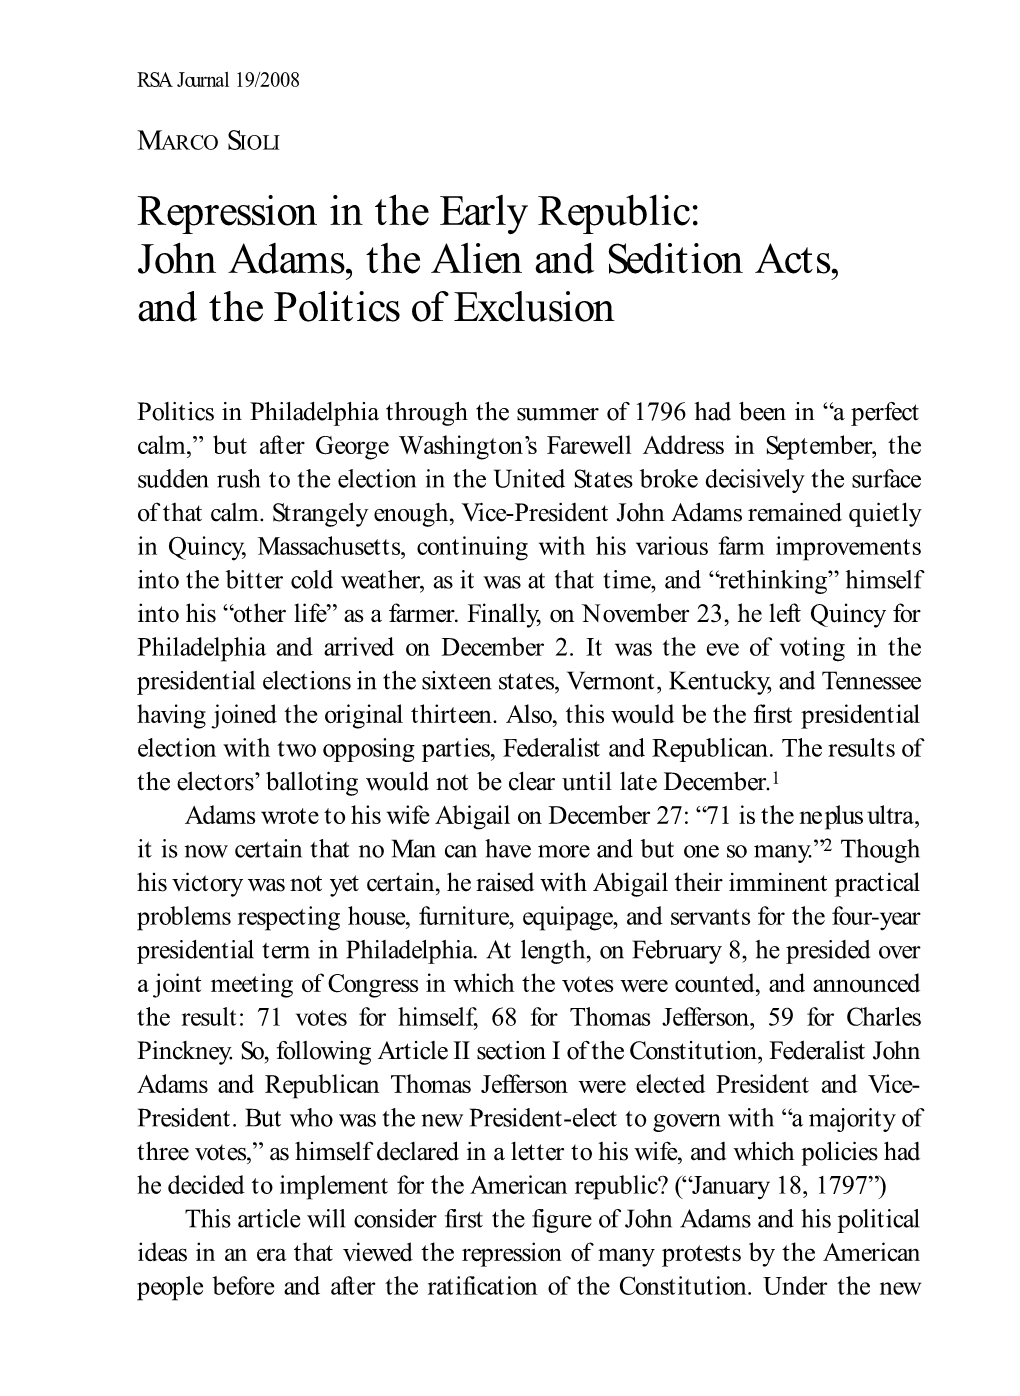 Repression in the Early Republic: John Adams, the Alien and Sedition Acts, and the Politics of Exclusion